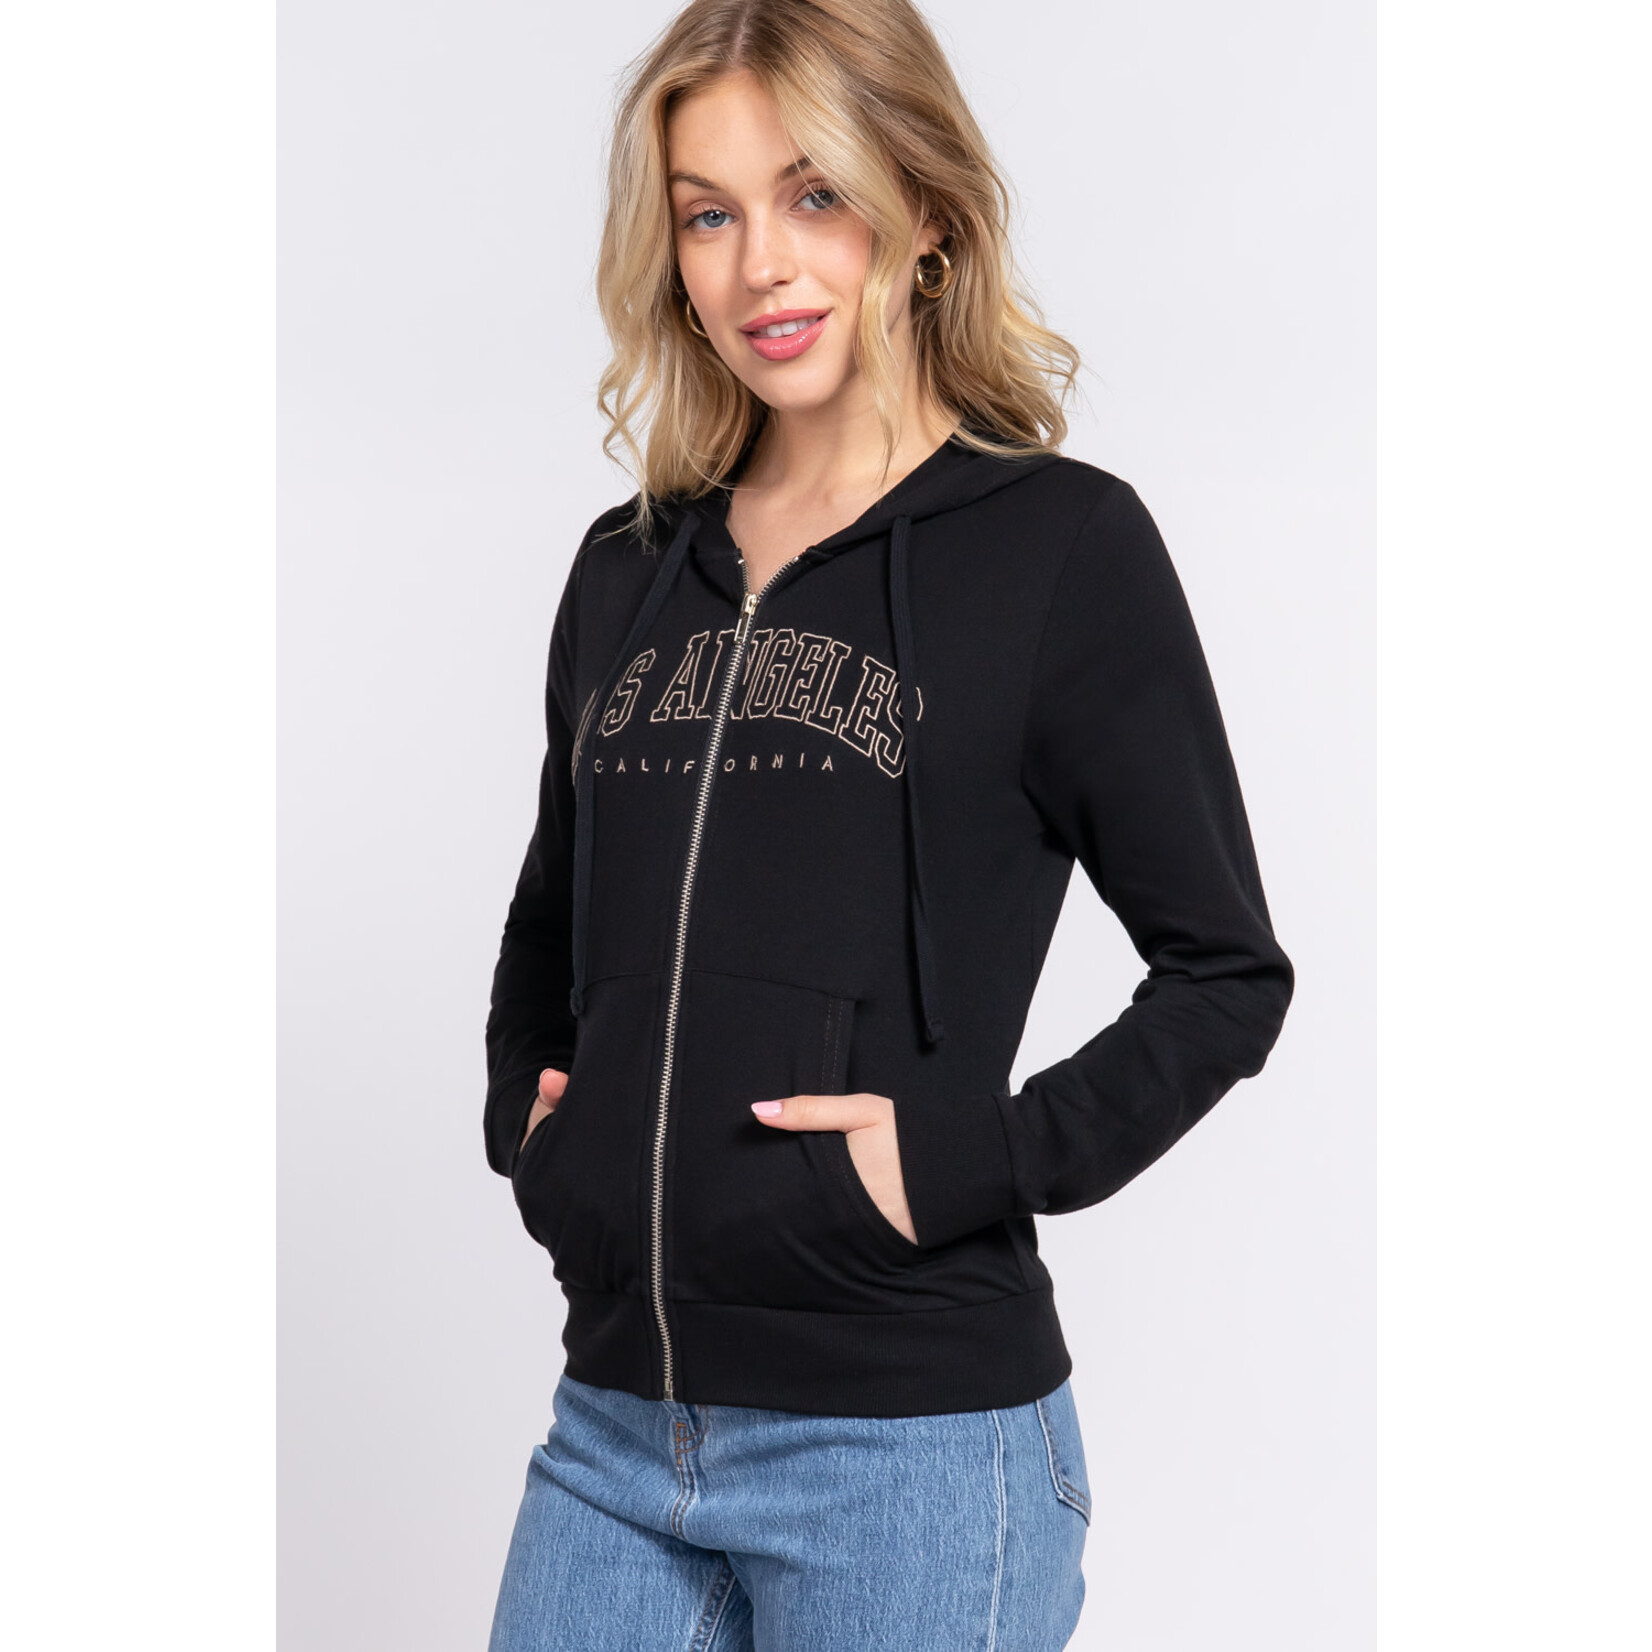 ACTIVE USA, INC. Active USA - Long Slv Embroidery Hoodie French Terry Jacket - J13571